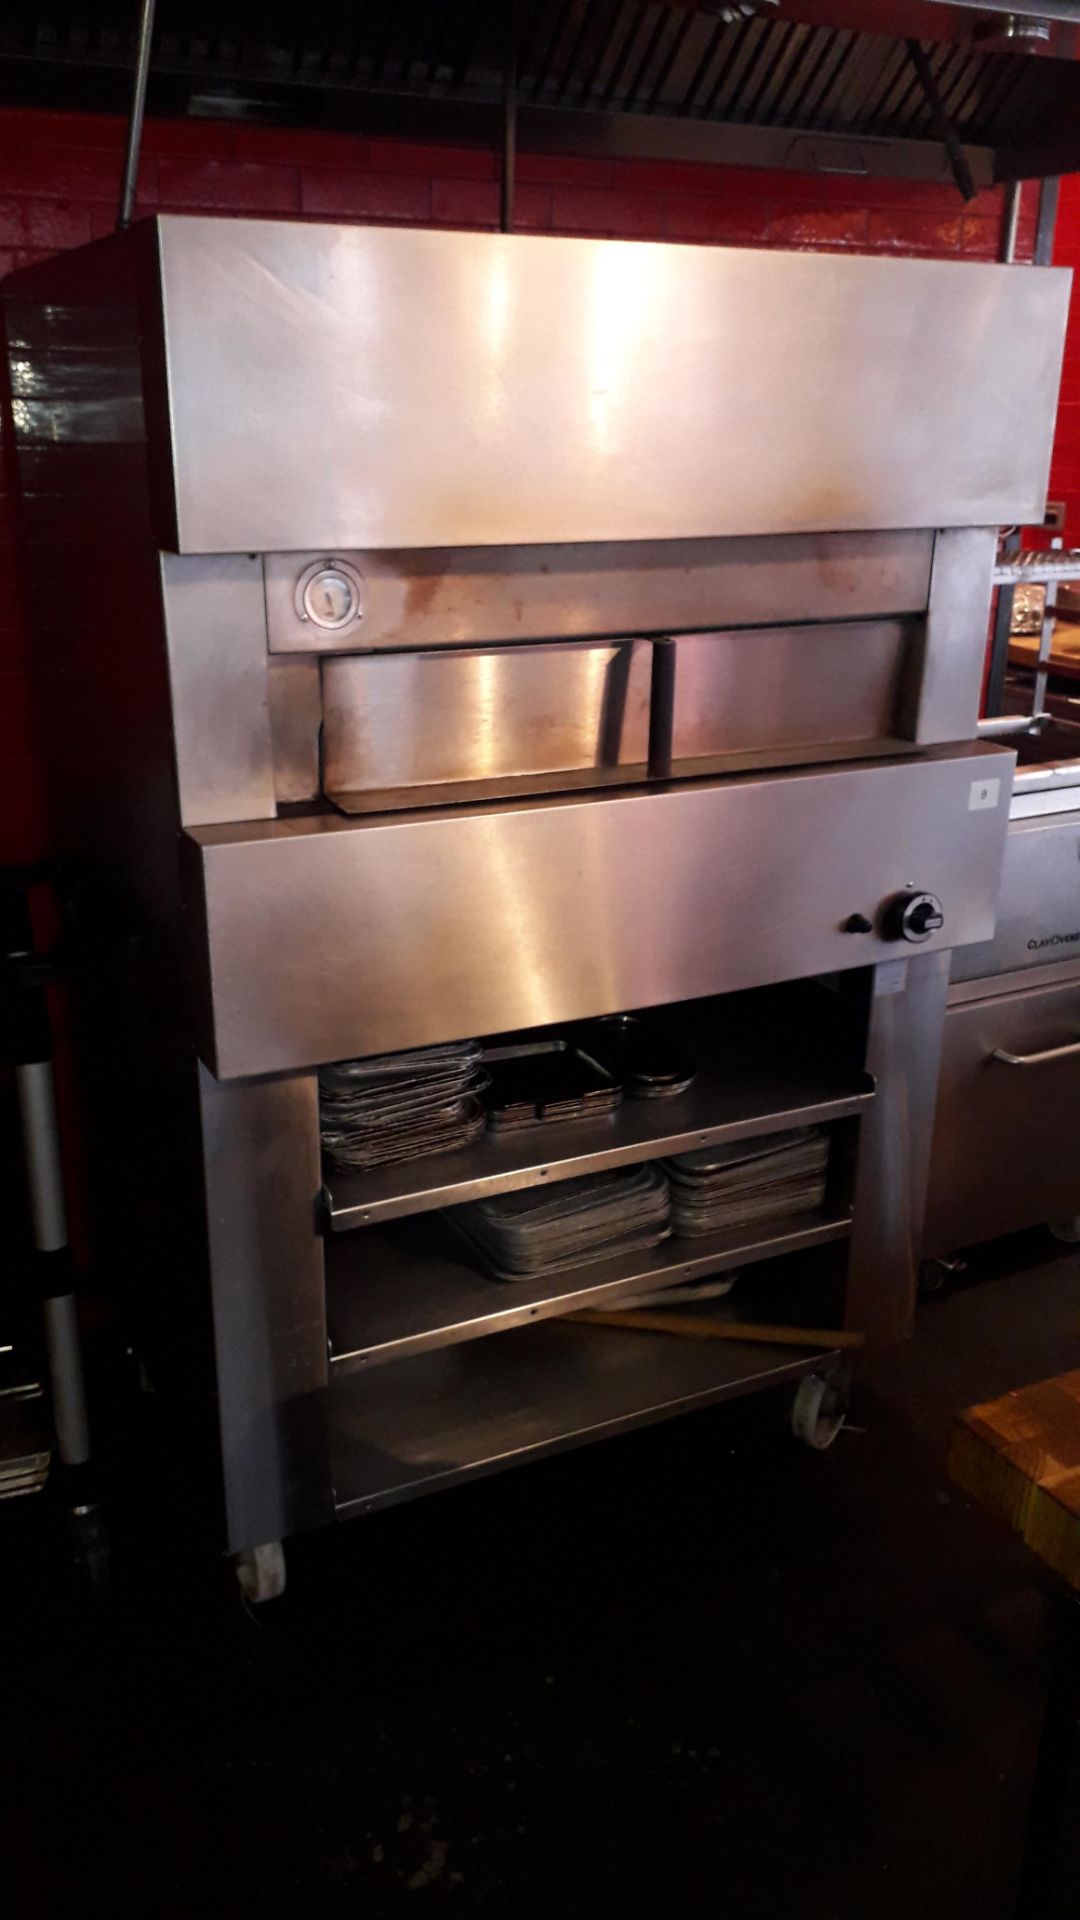 Clay Ovens Clayburn stainless steel, gas fired Pizza Oven, serial number 18213